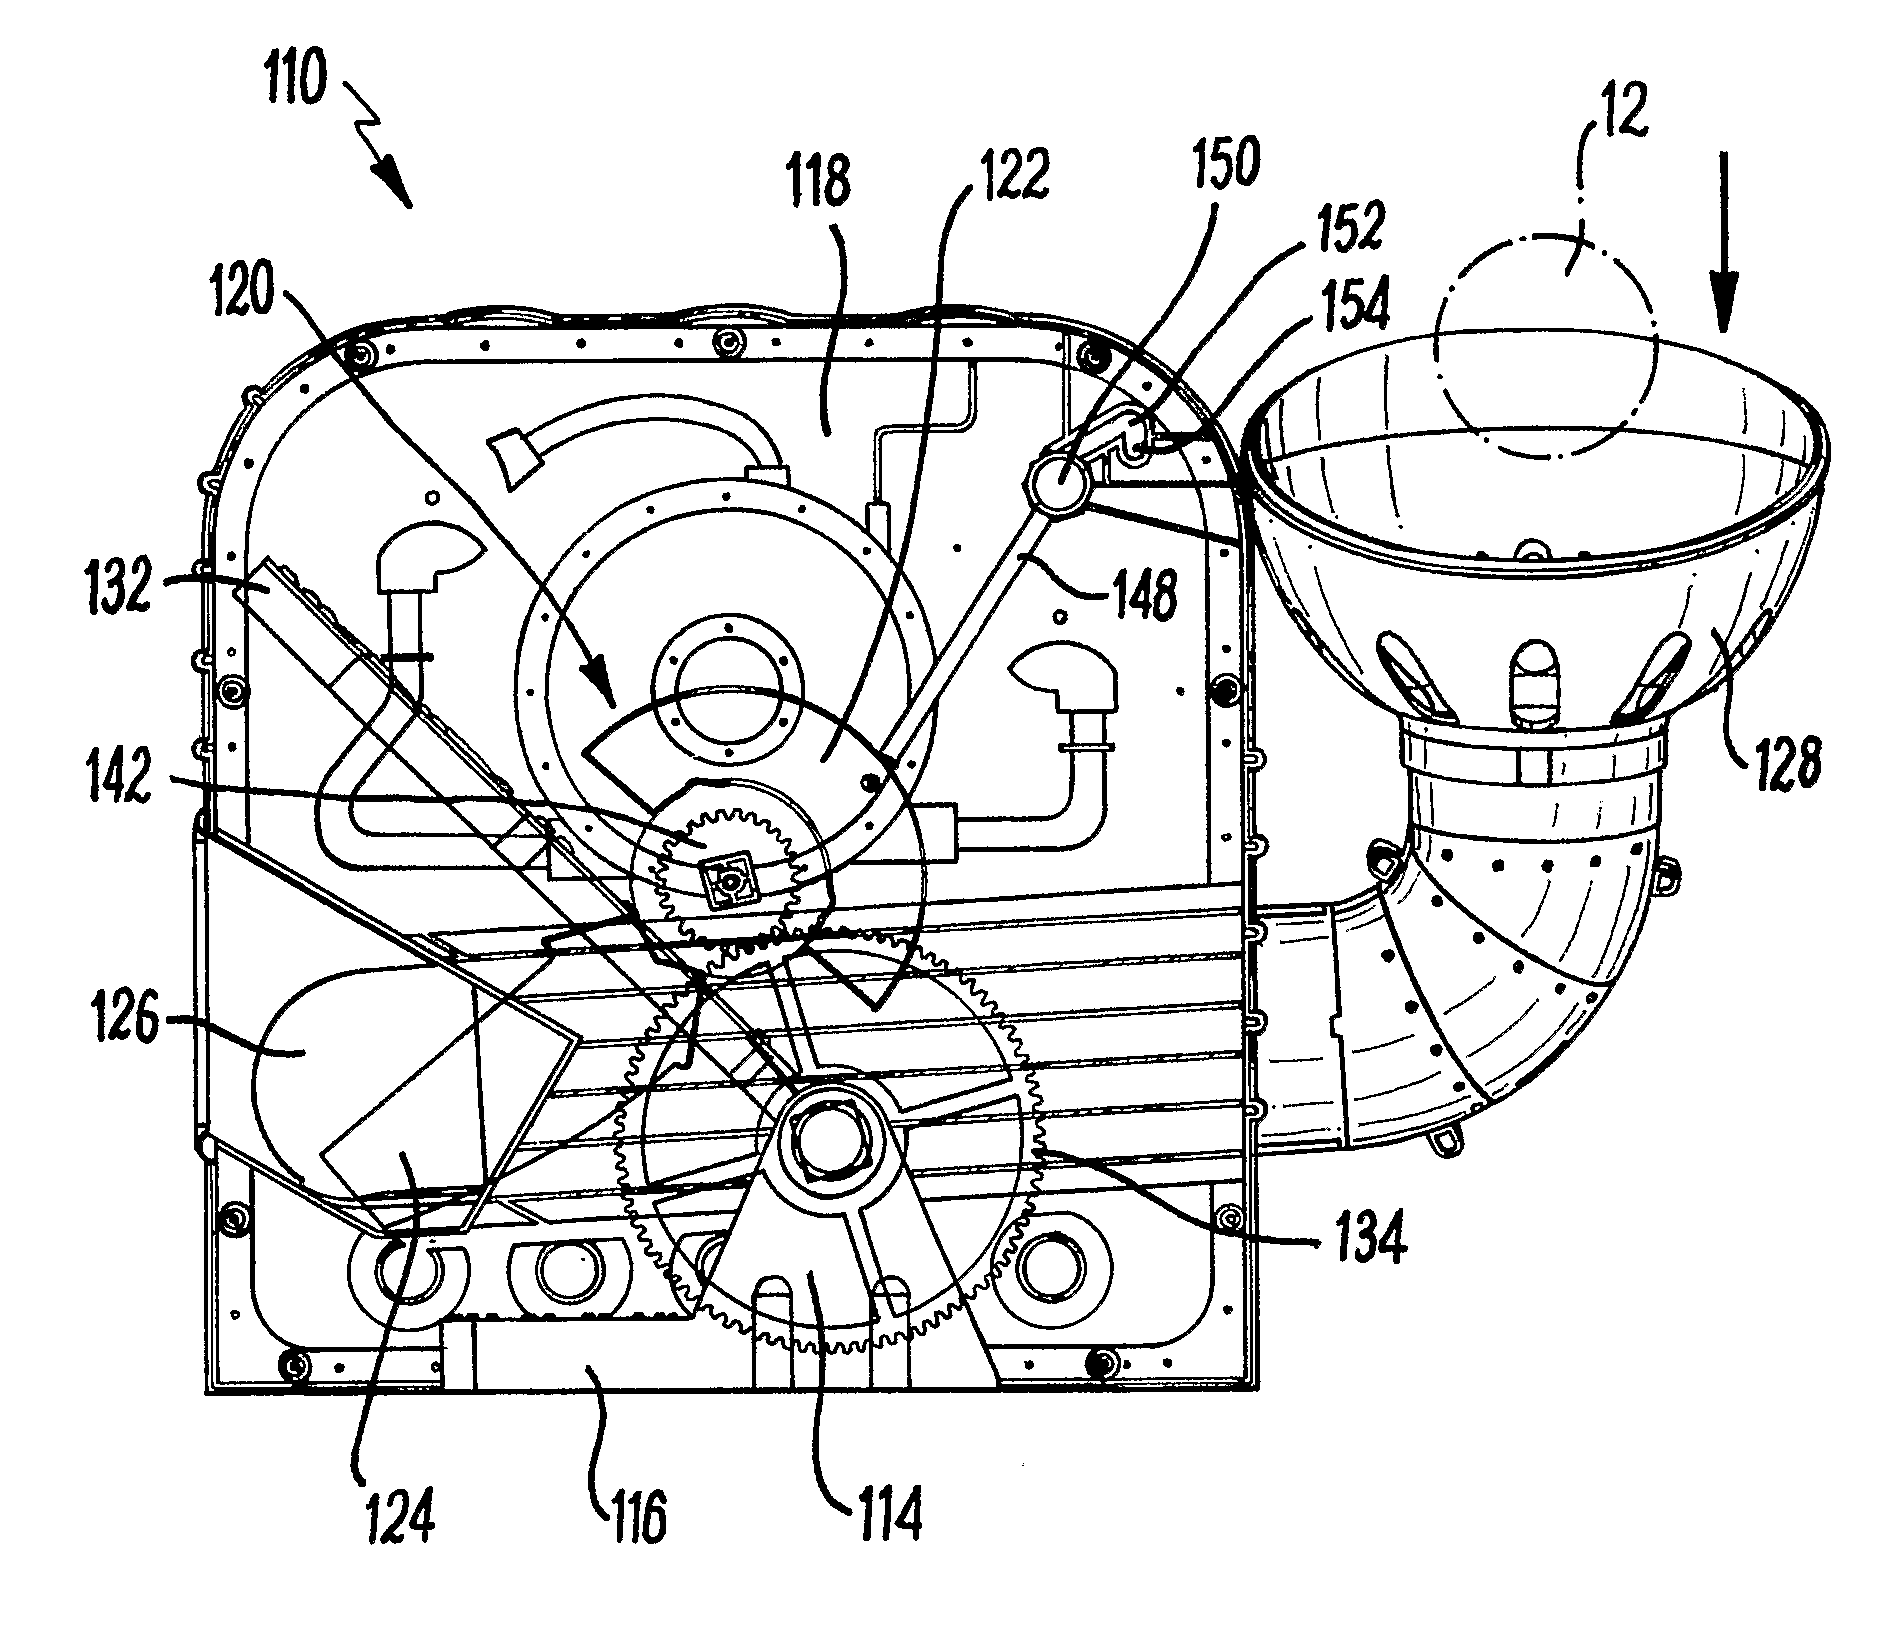 Apparatus for projecting an object